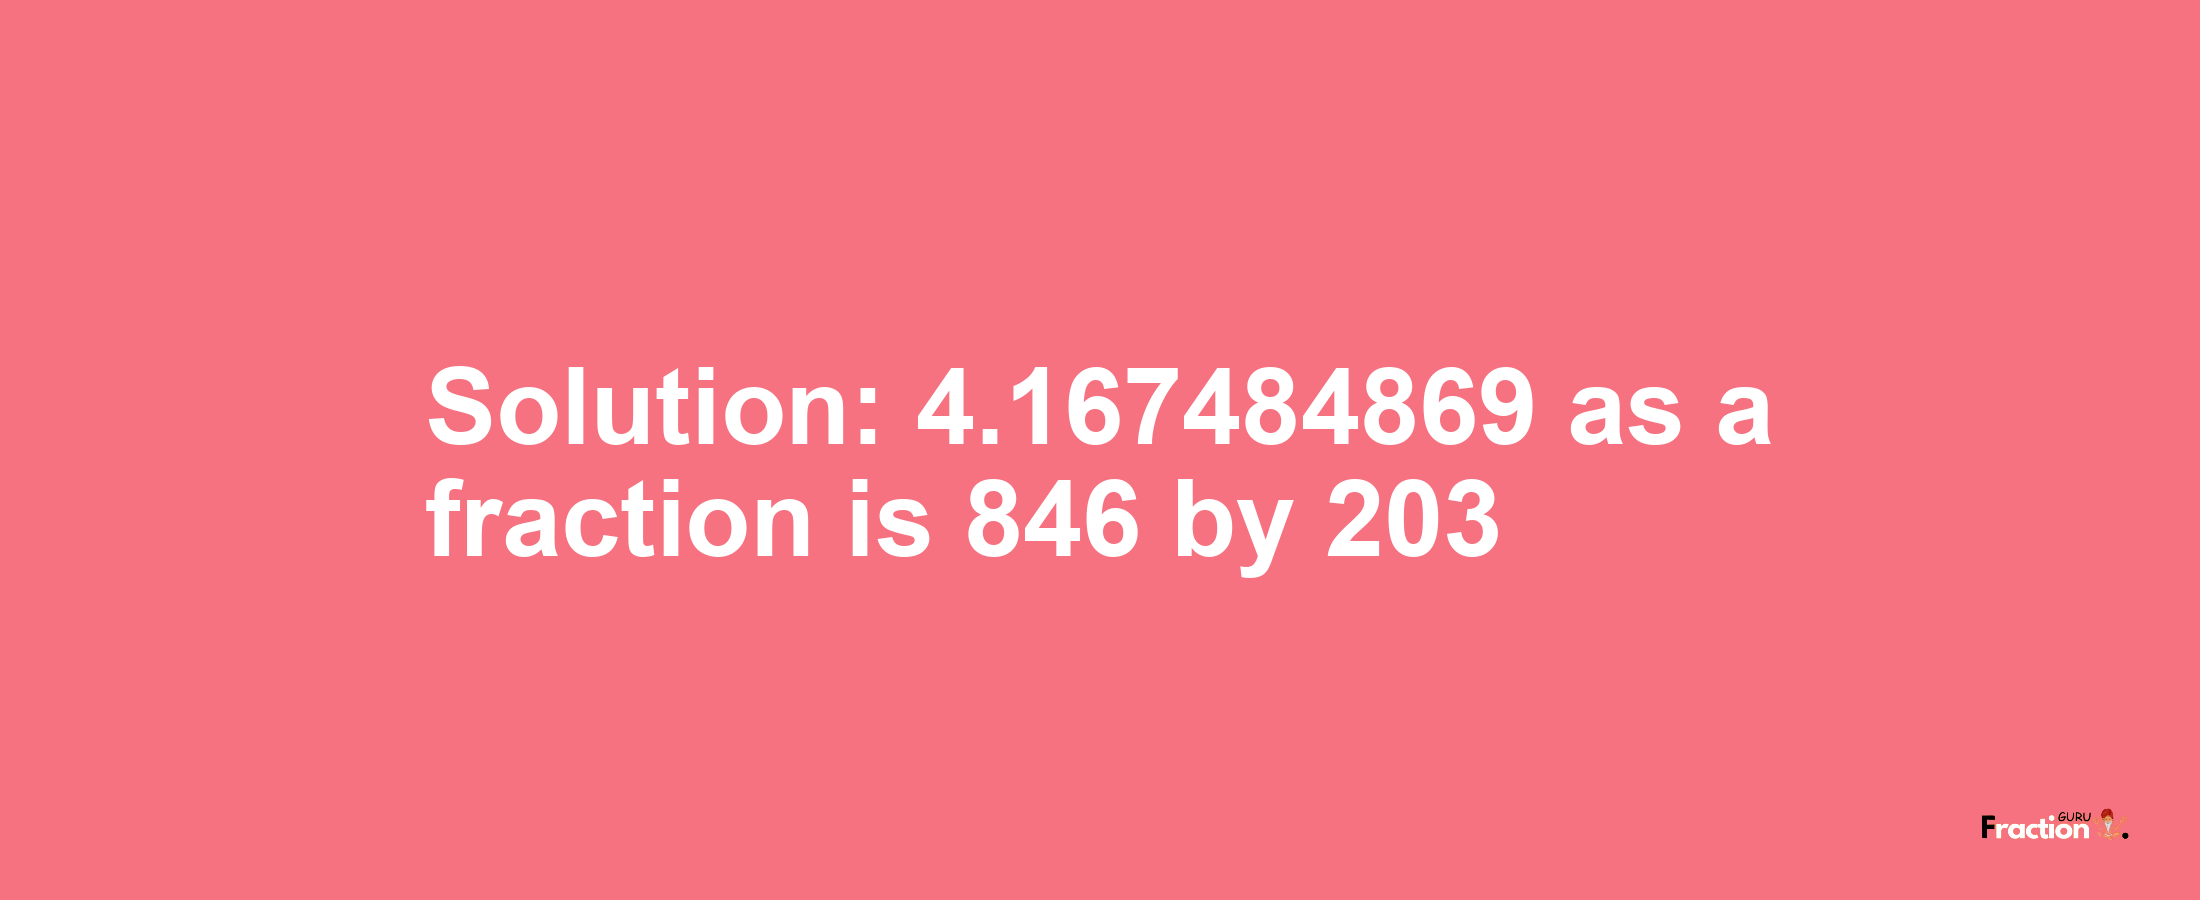 Solution:4.167484869 as a fraction is 846/203